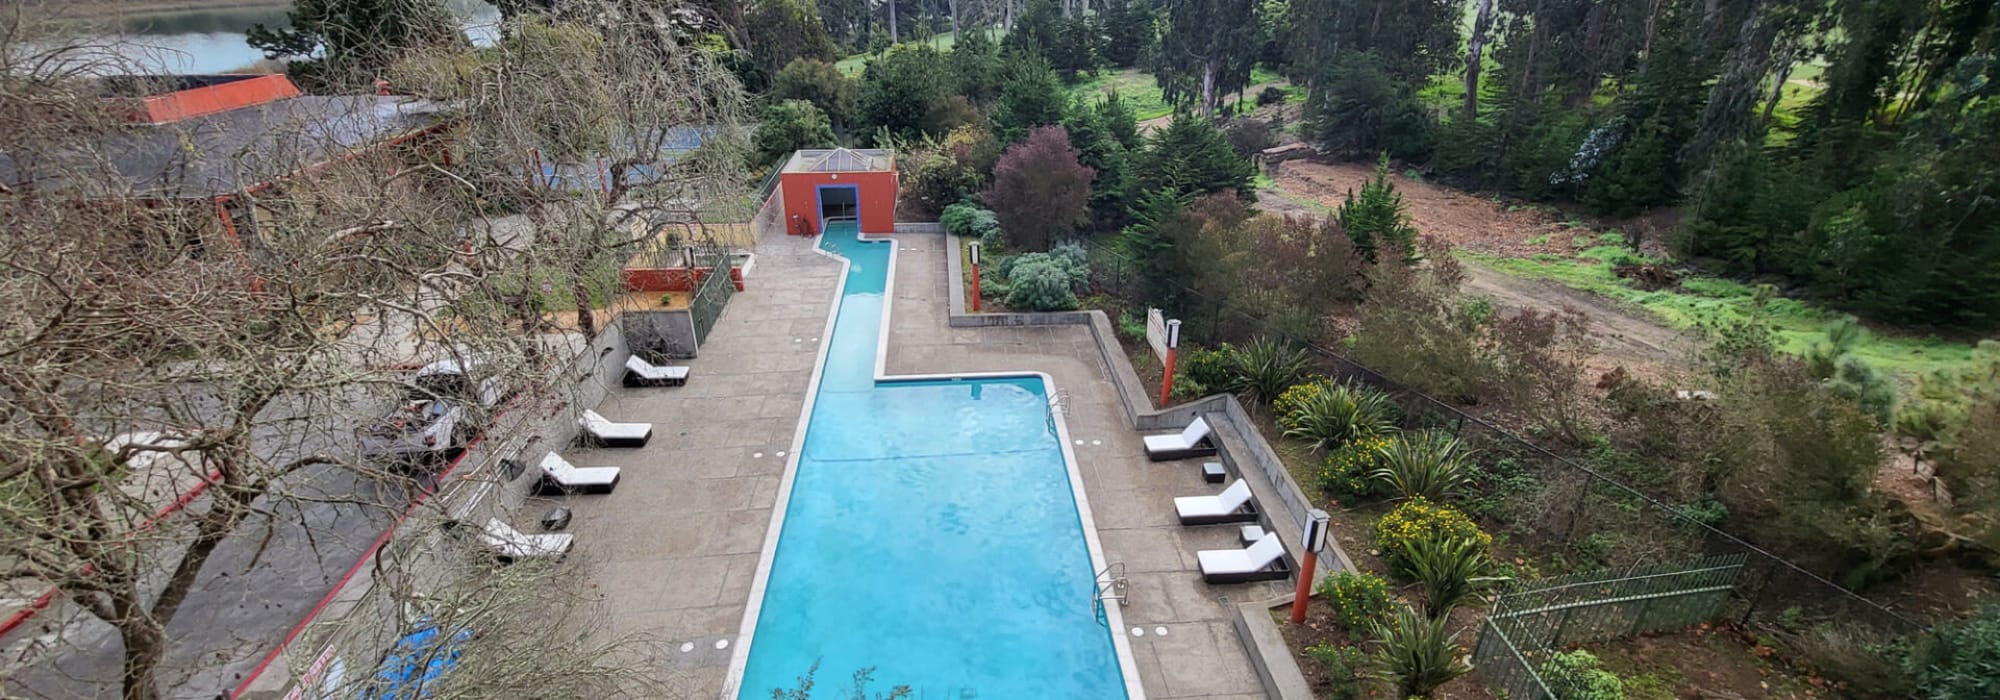 Lounge chairs by the resort-style swimming pool at Lakewood Apartments at Lake Merced in San Francisco, California